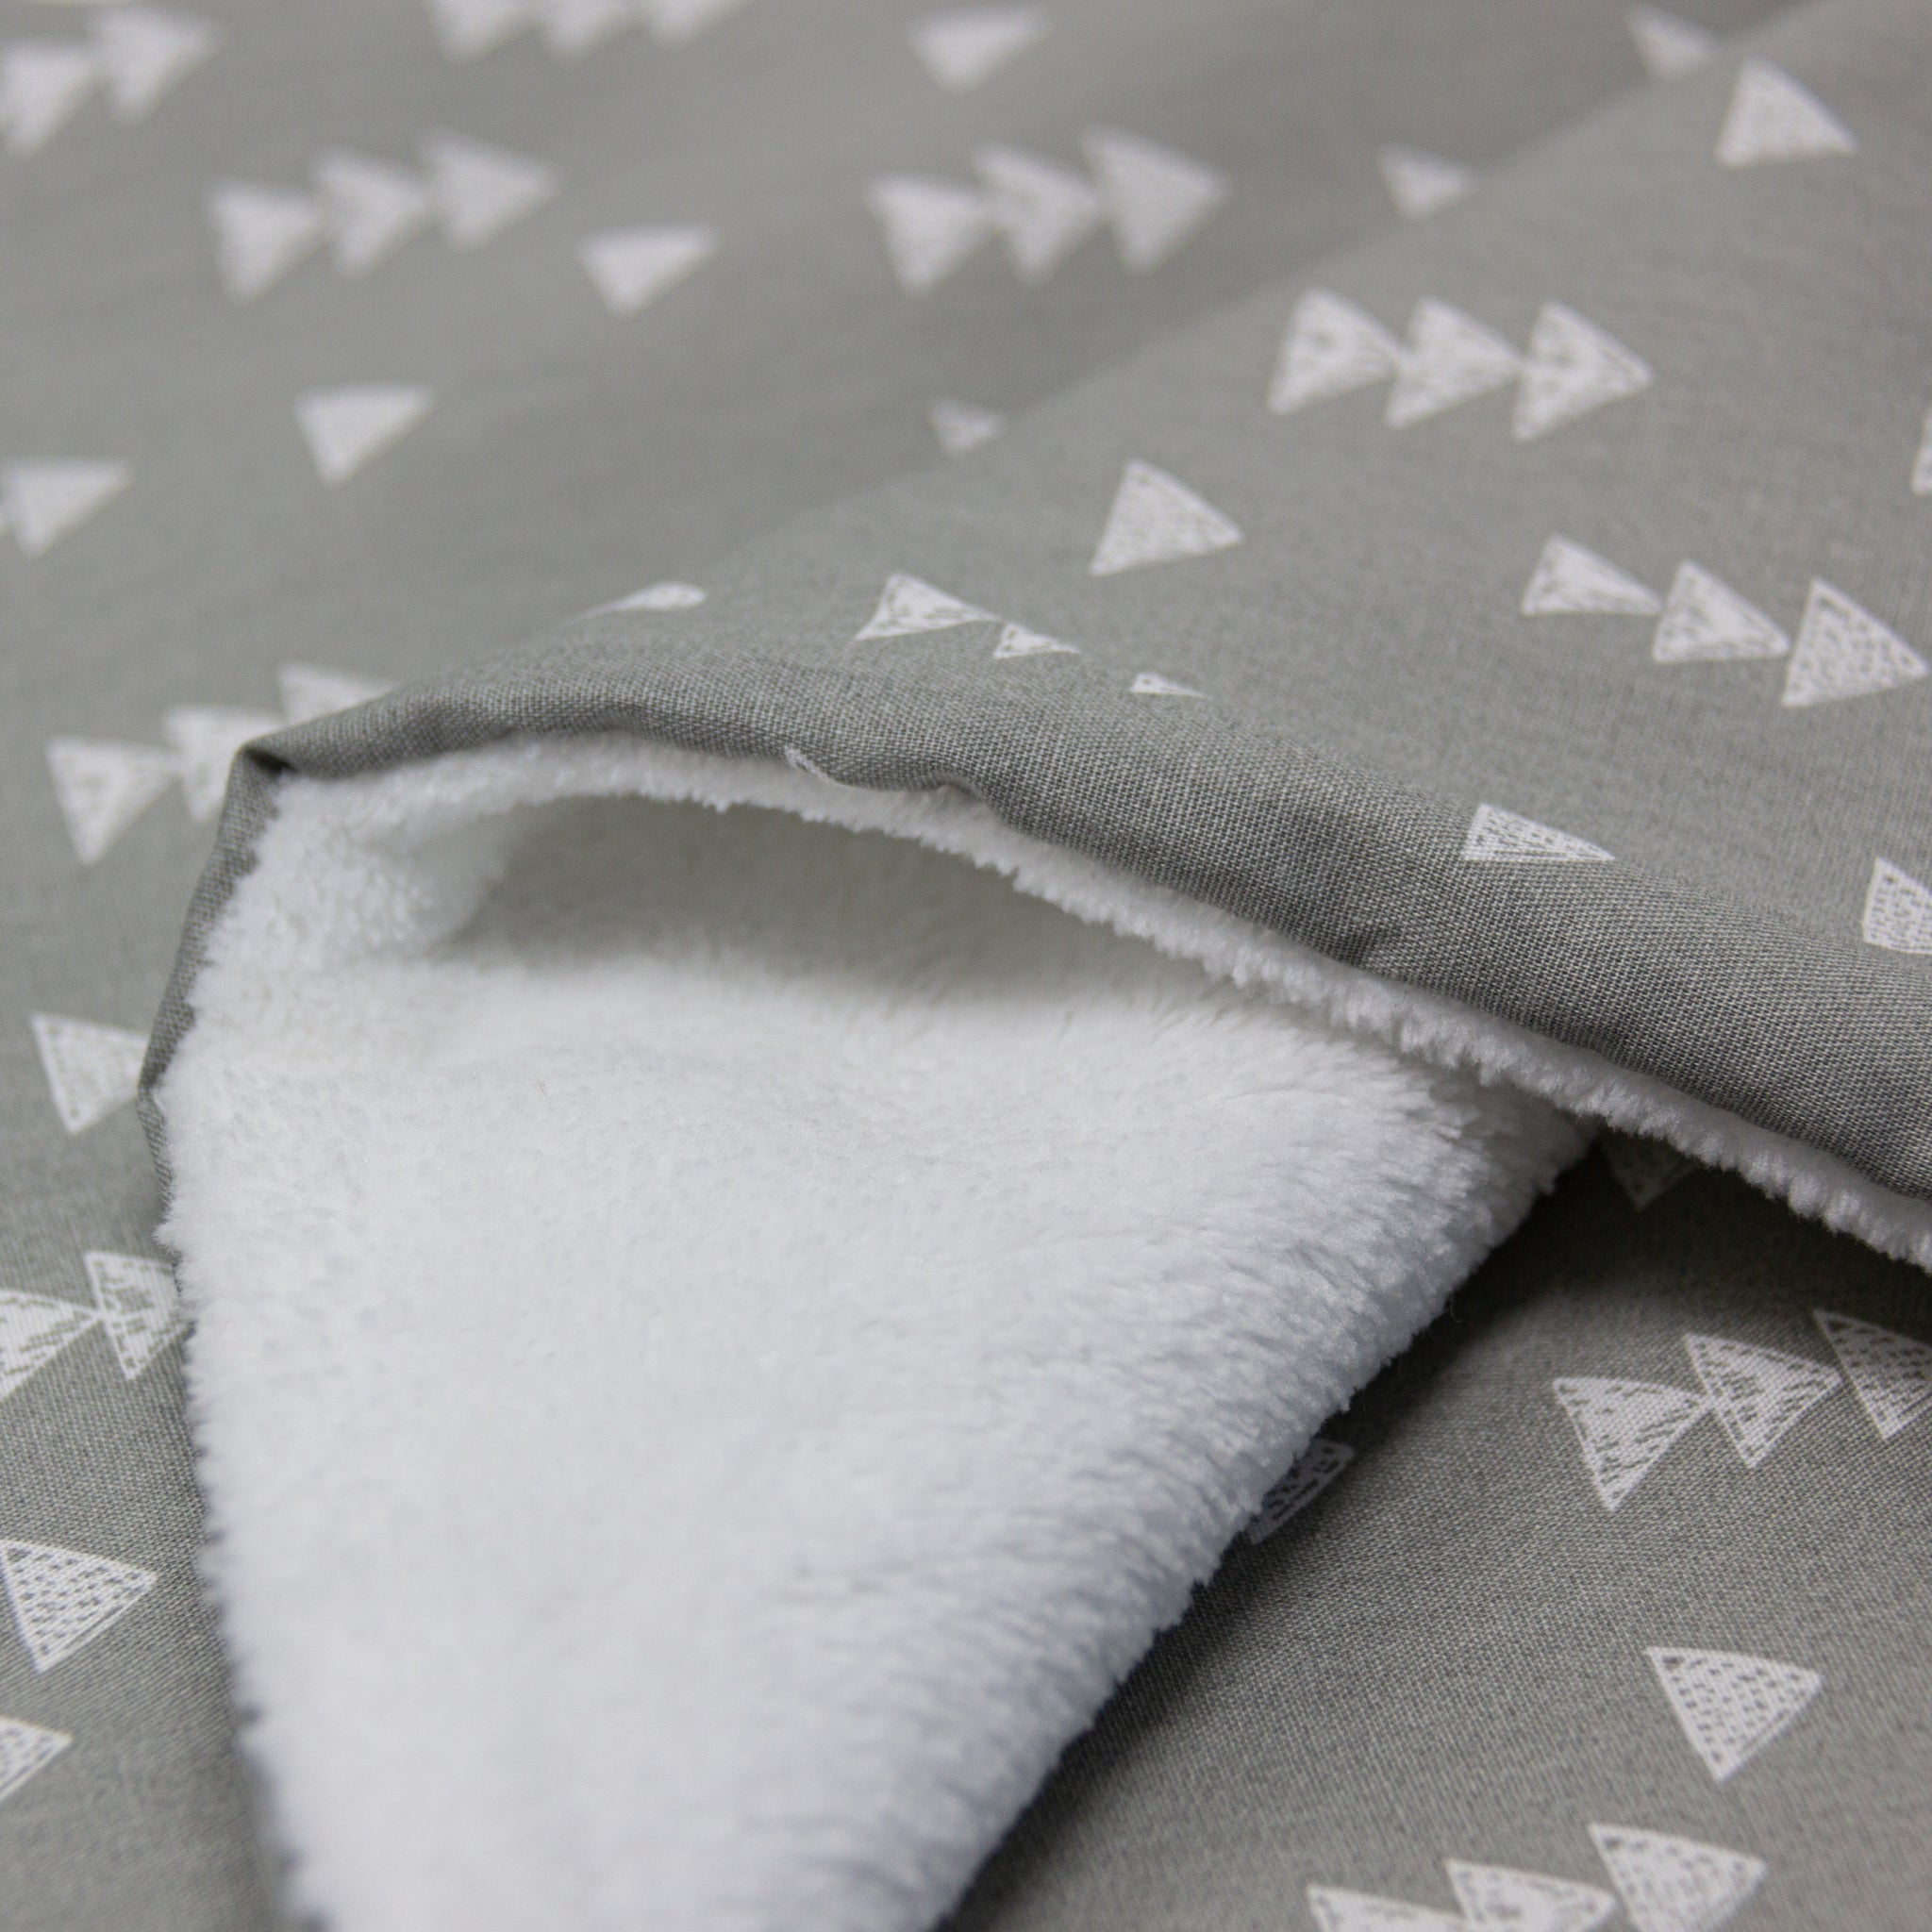 6 Different Newborn Baby Blankets To Get For Your Baby Living Textiles Co